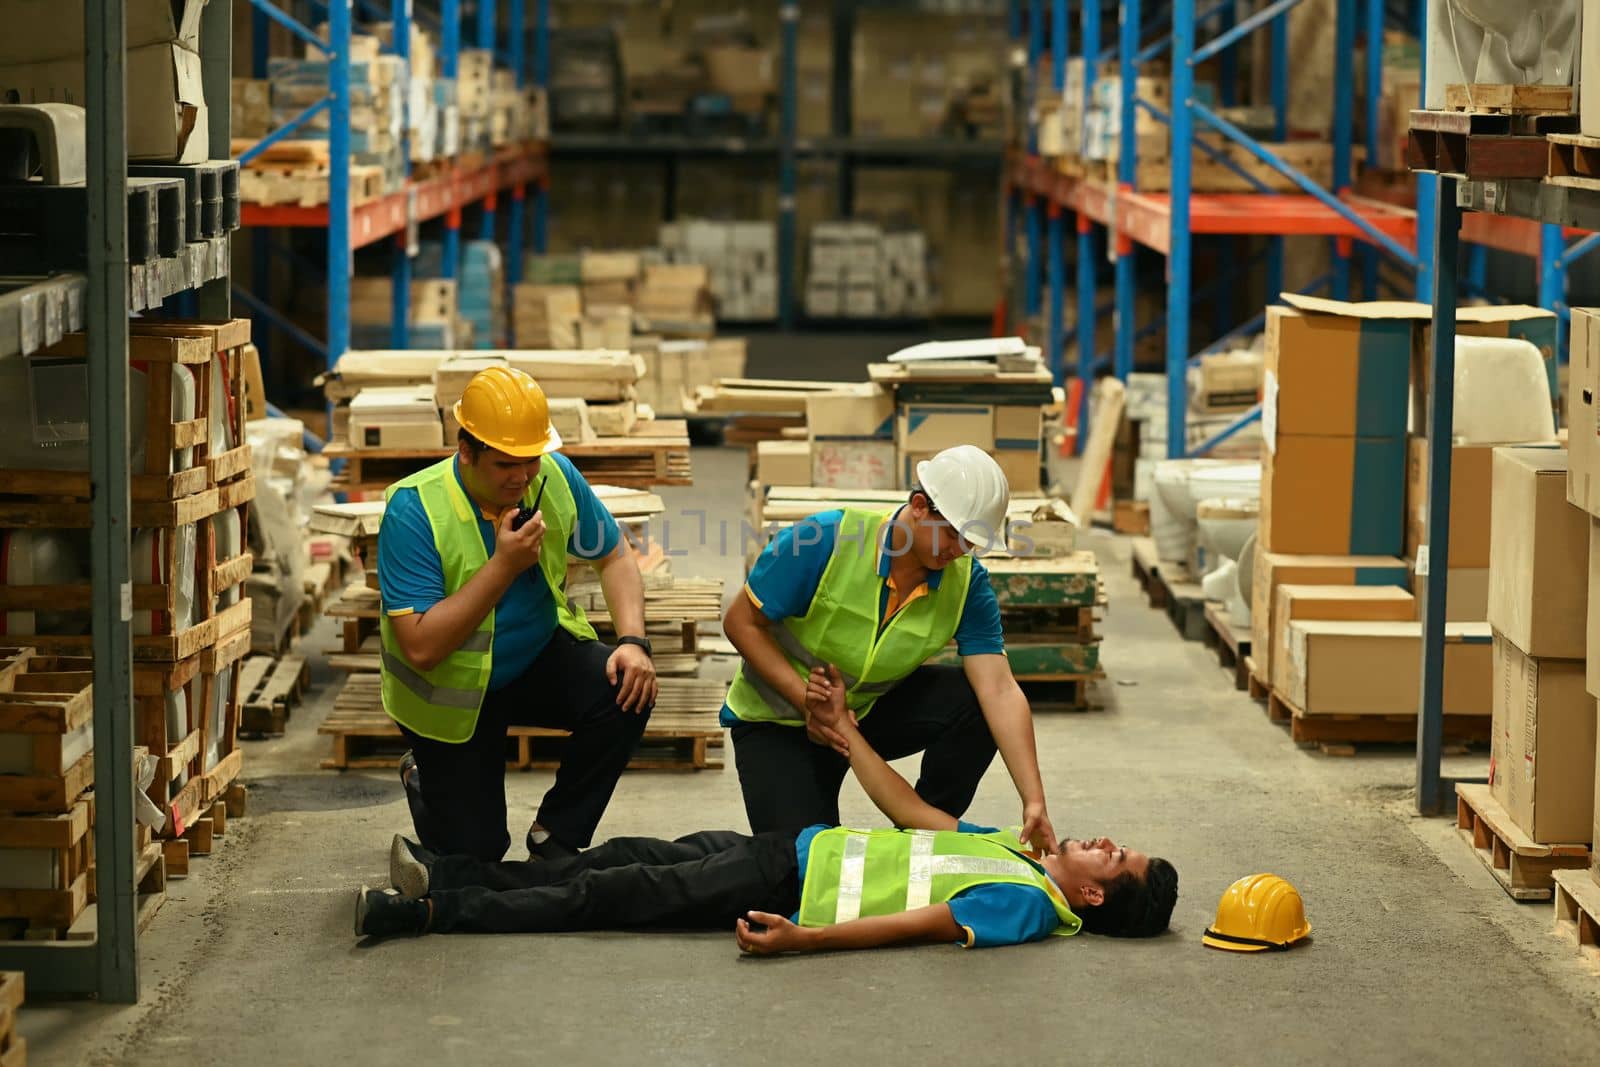 Two industrial worker are helping and giving the injured first aid to man lying unconscious on concrete floor.